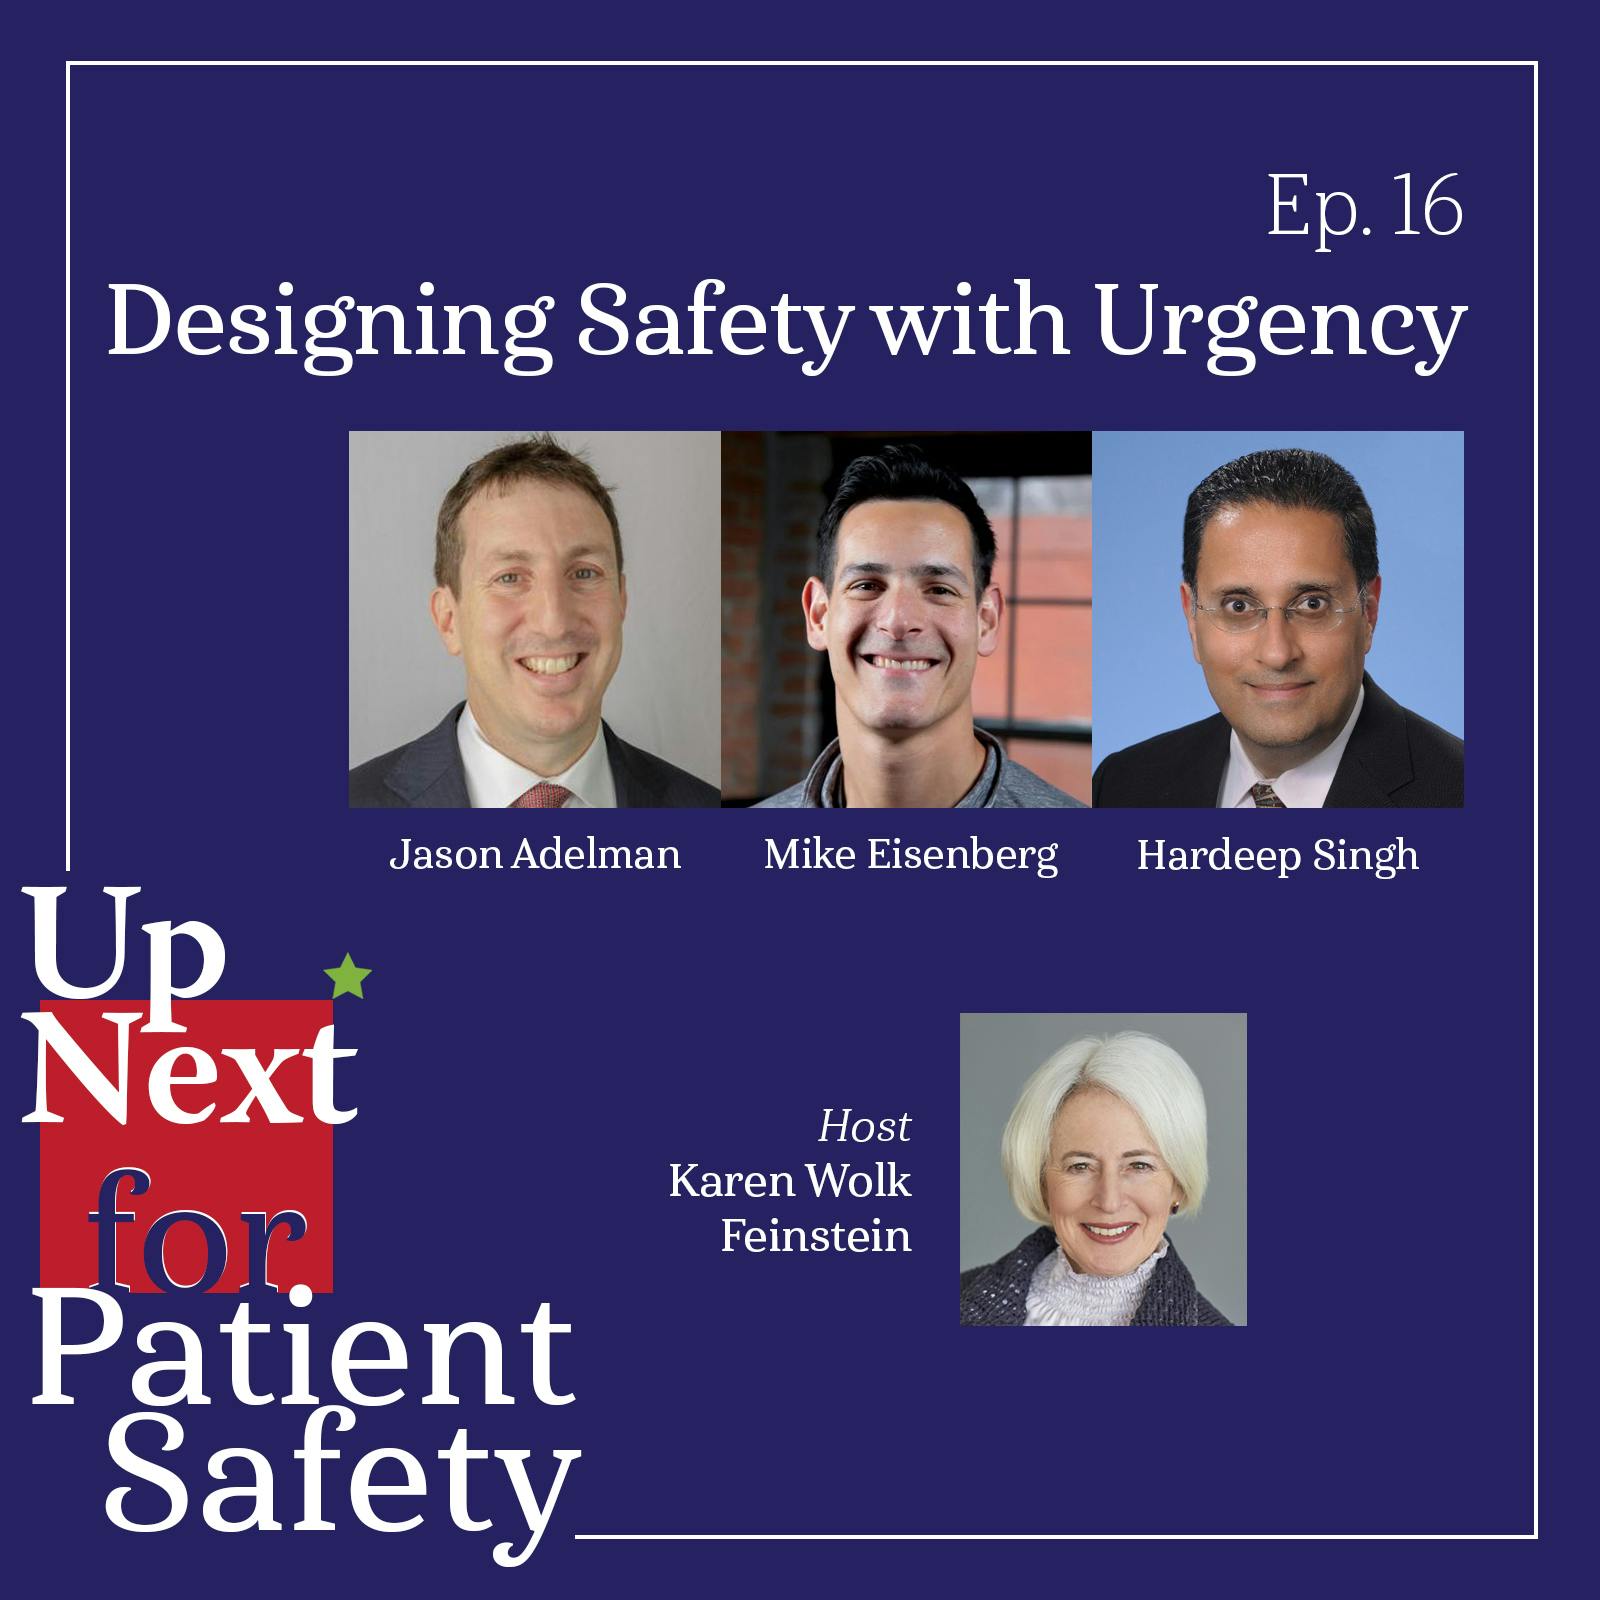 Designing Safety with Urgency